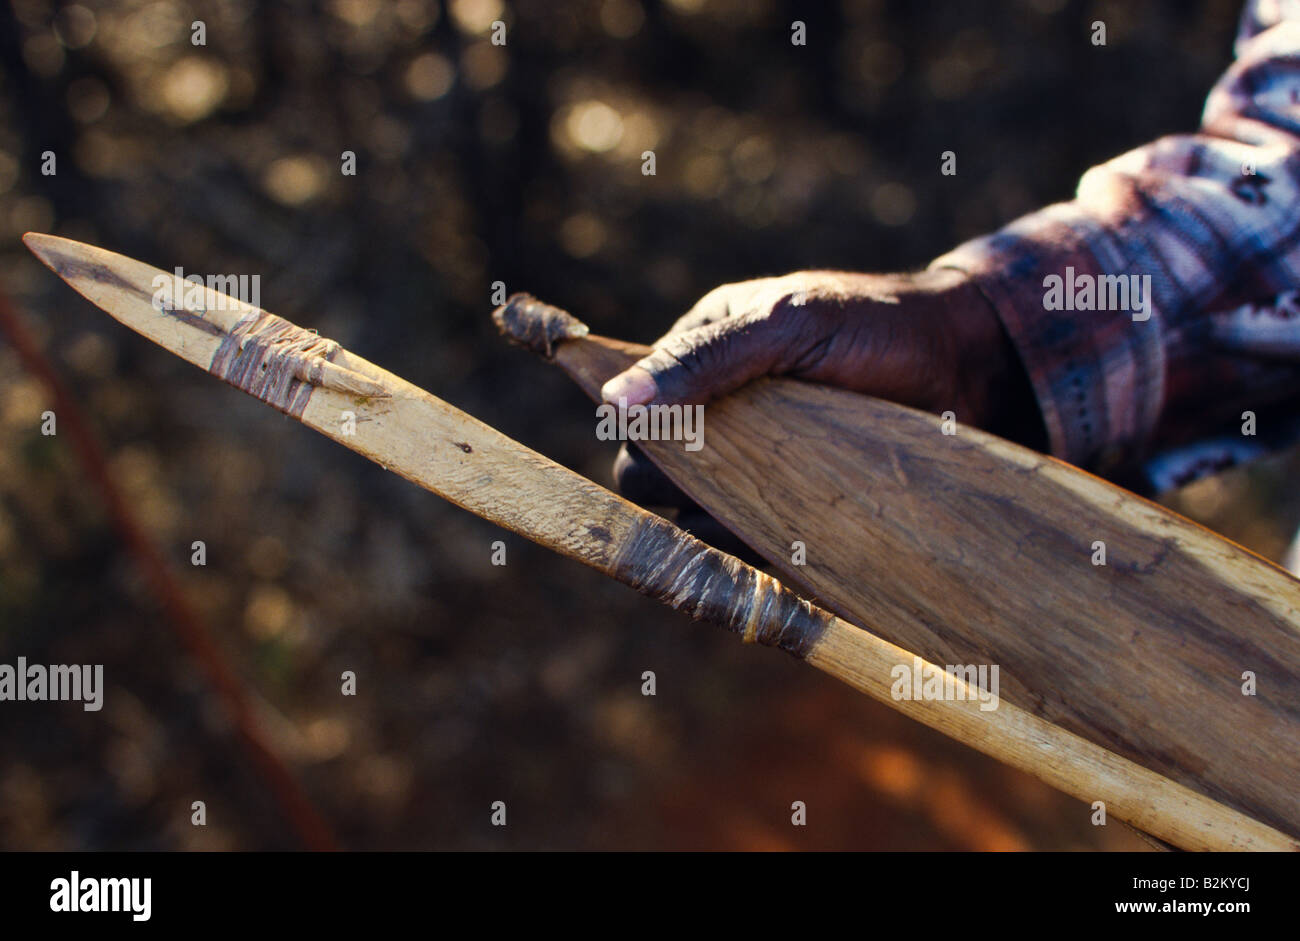 Aboriginal spear thrower and spear, outback Australia Stock Photo